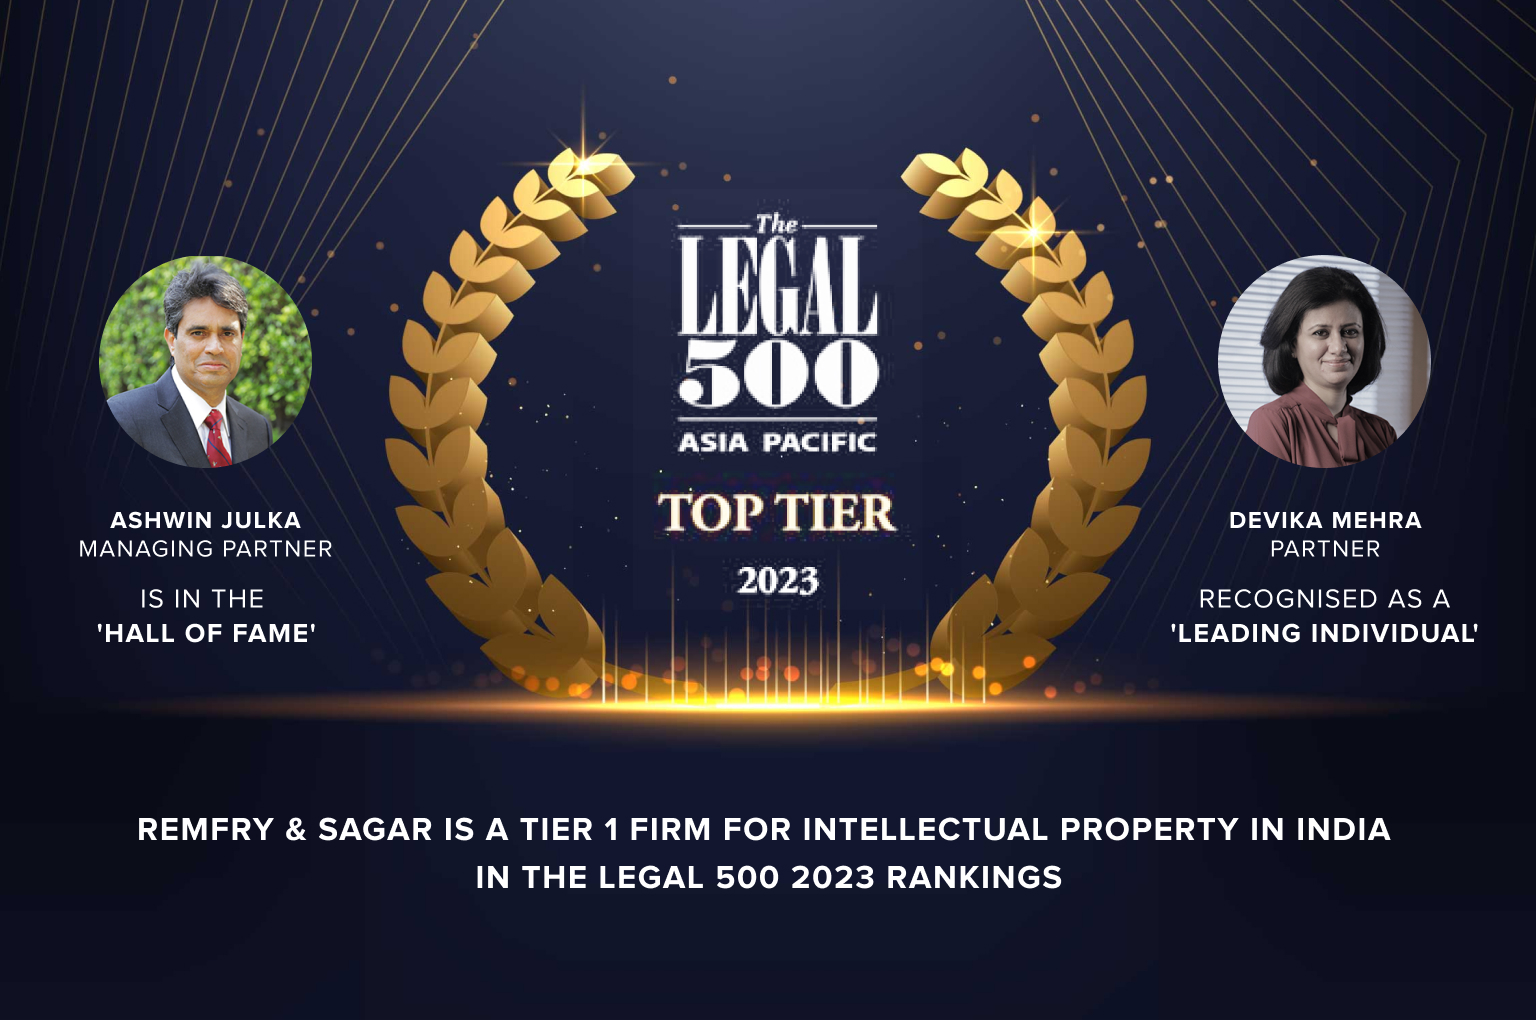 The Legal 500 2023 Rankings